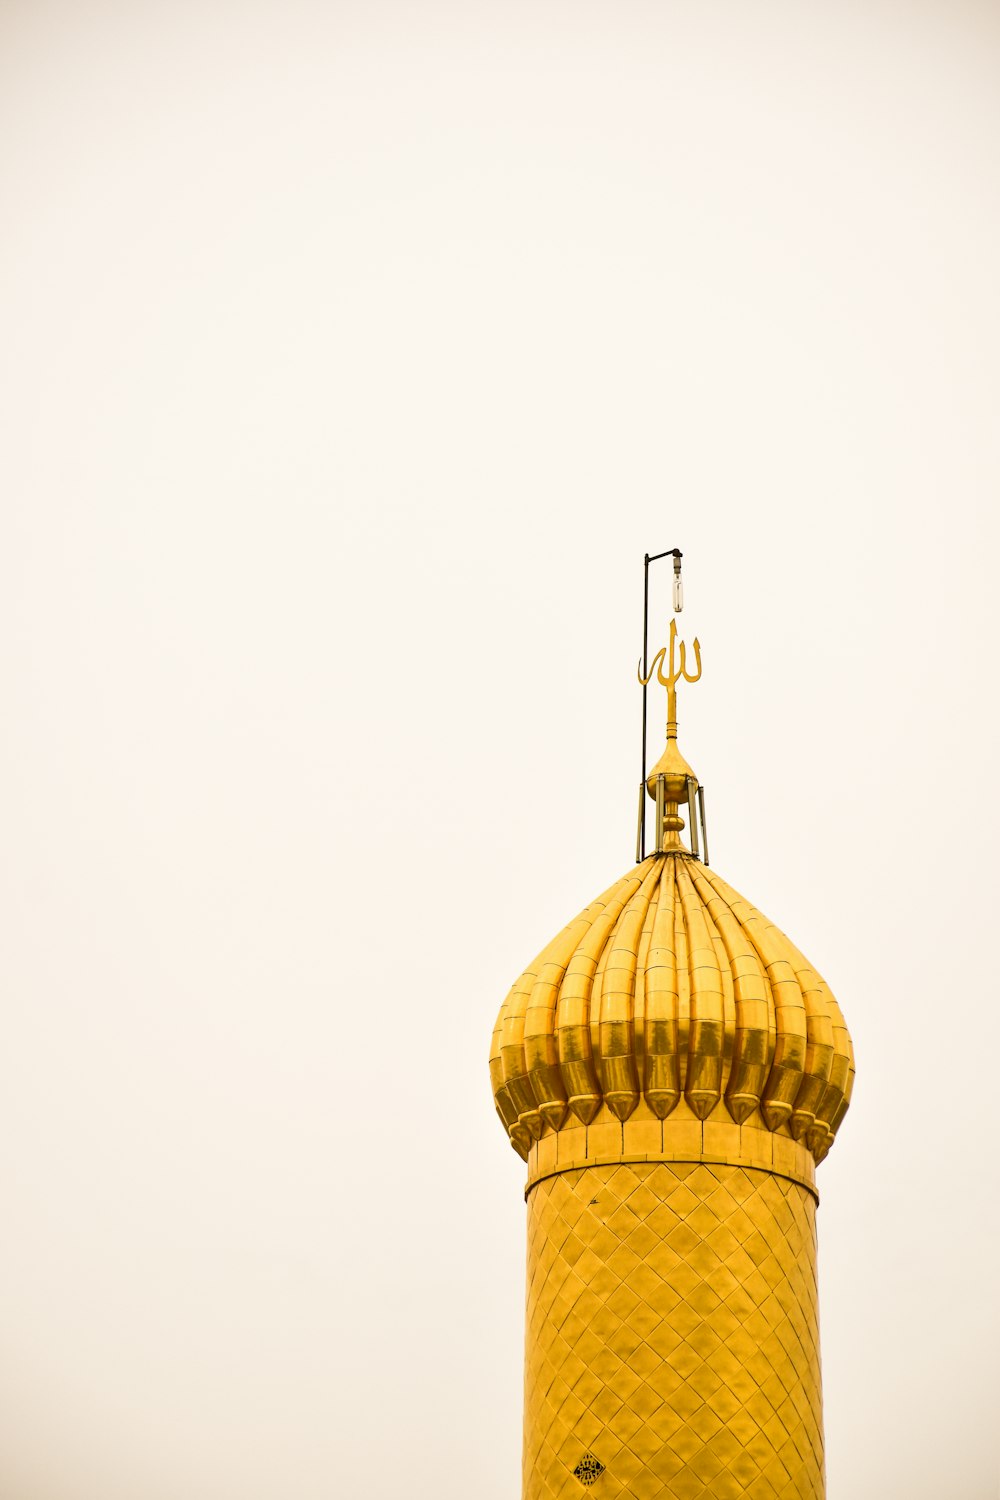 gold dome tower